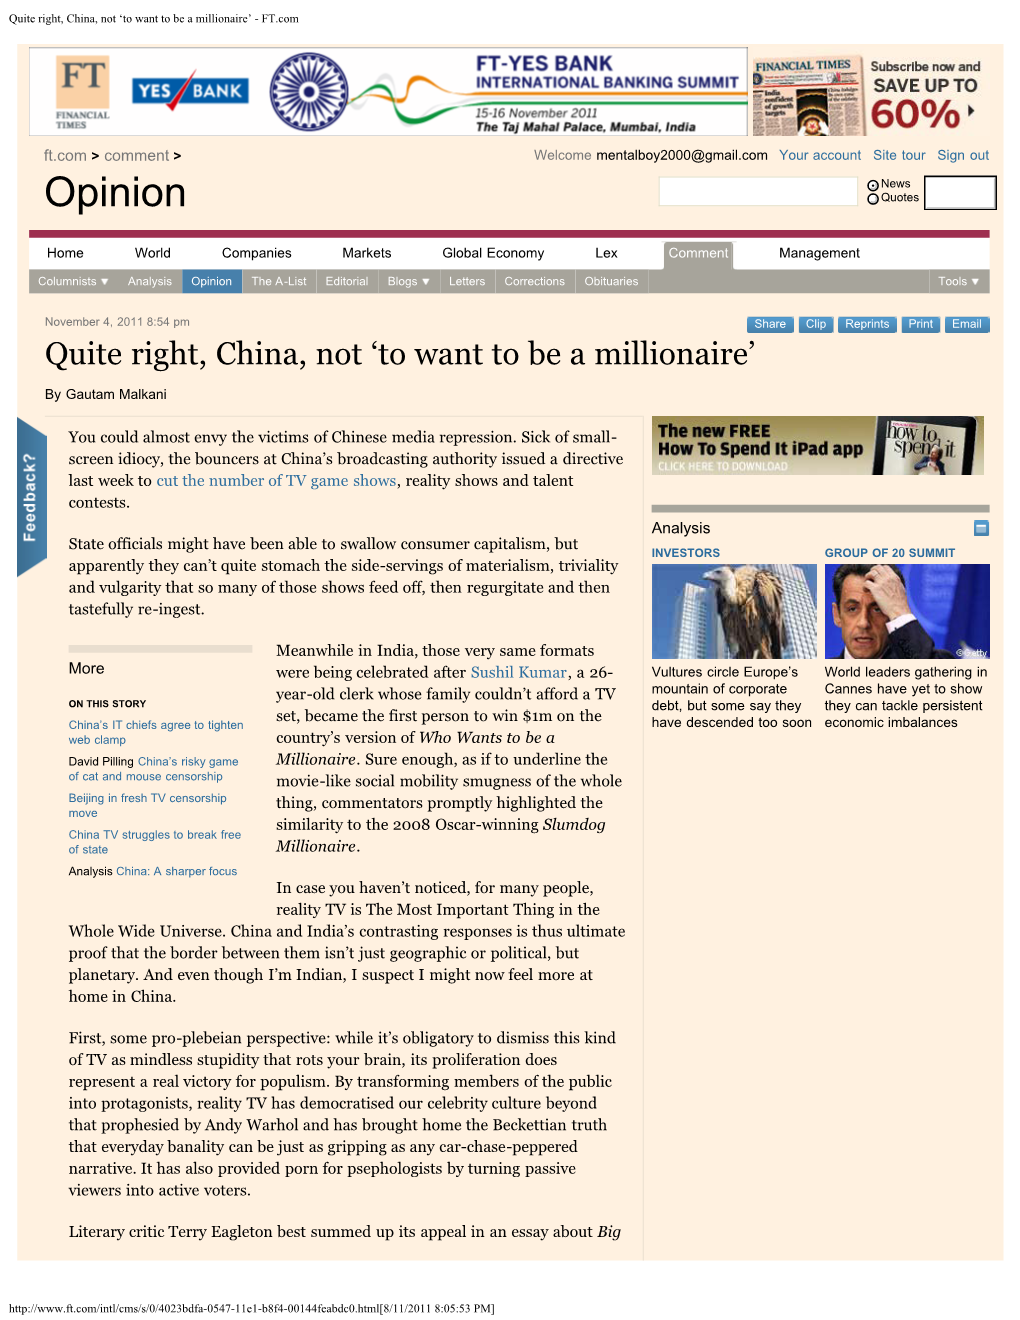 Quite Right, China, Not 'To Want to Be a Millionaire'